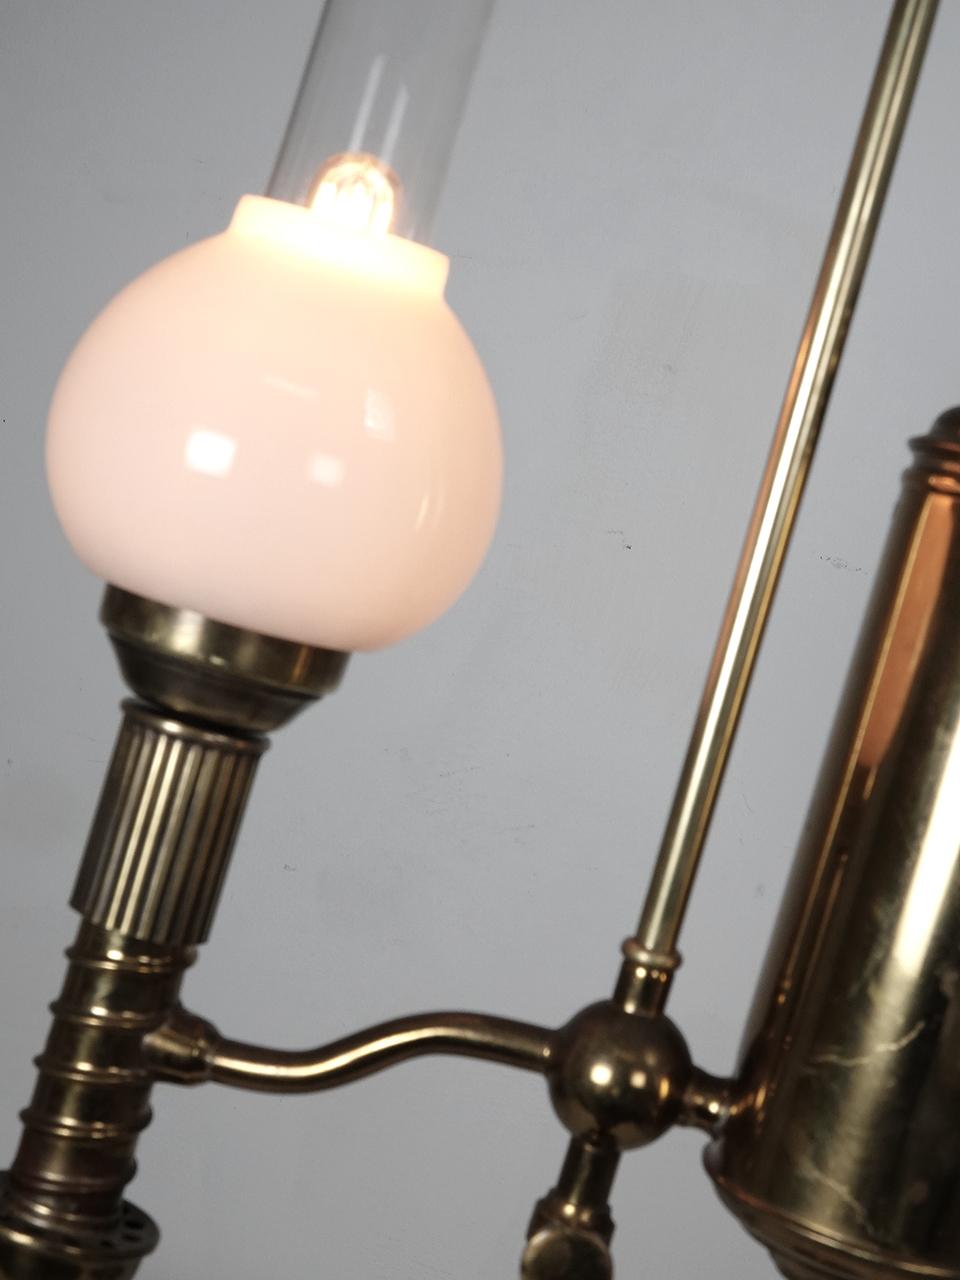 A Victorian period student desk lamp from about 1875 is solid brass, and was meant to burn oil or kerosene. The tank is off to the side, helping light shine down onto a desktop. This lamp is now electrified and takes standard bulb.
  